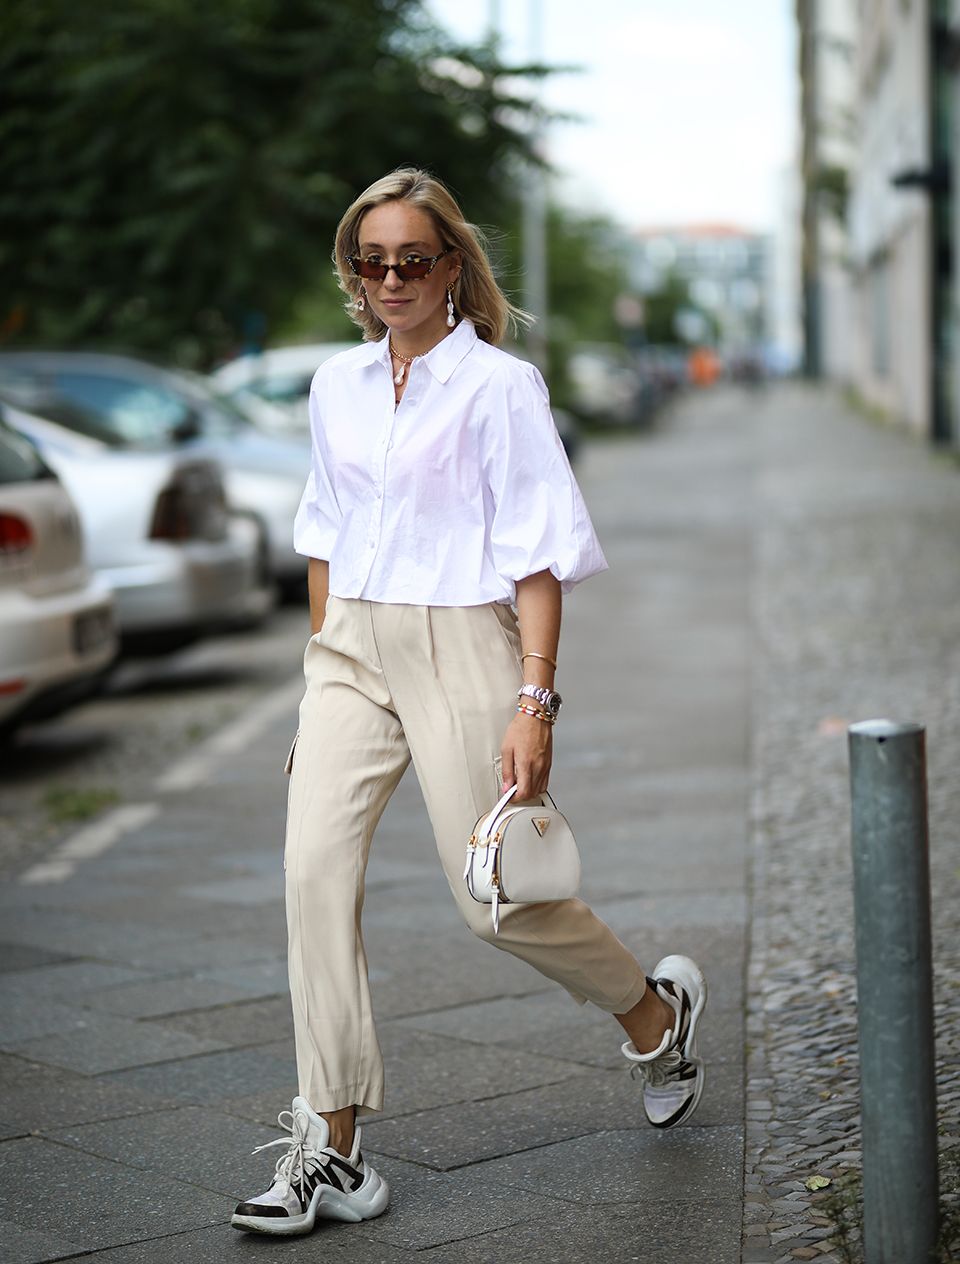 Styling inspiration: try trainers with tailored separates, such as trousers and shirting